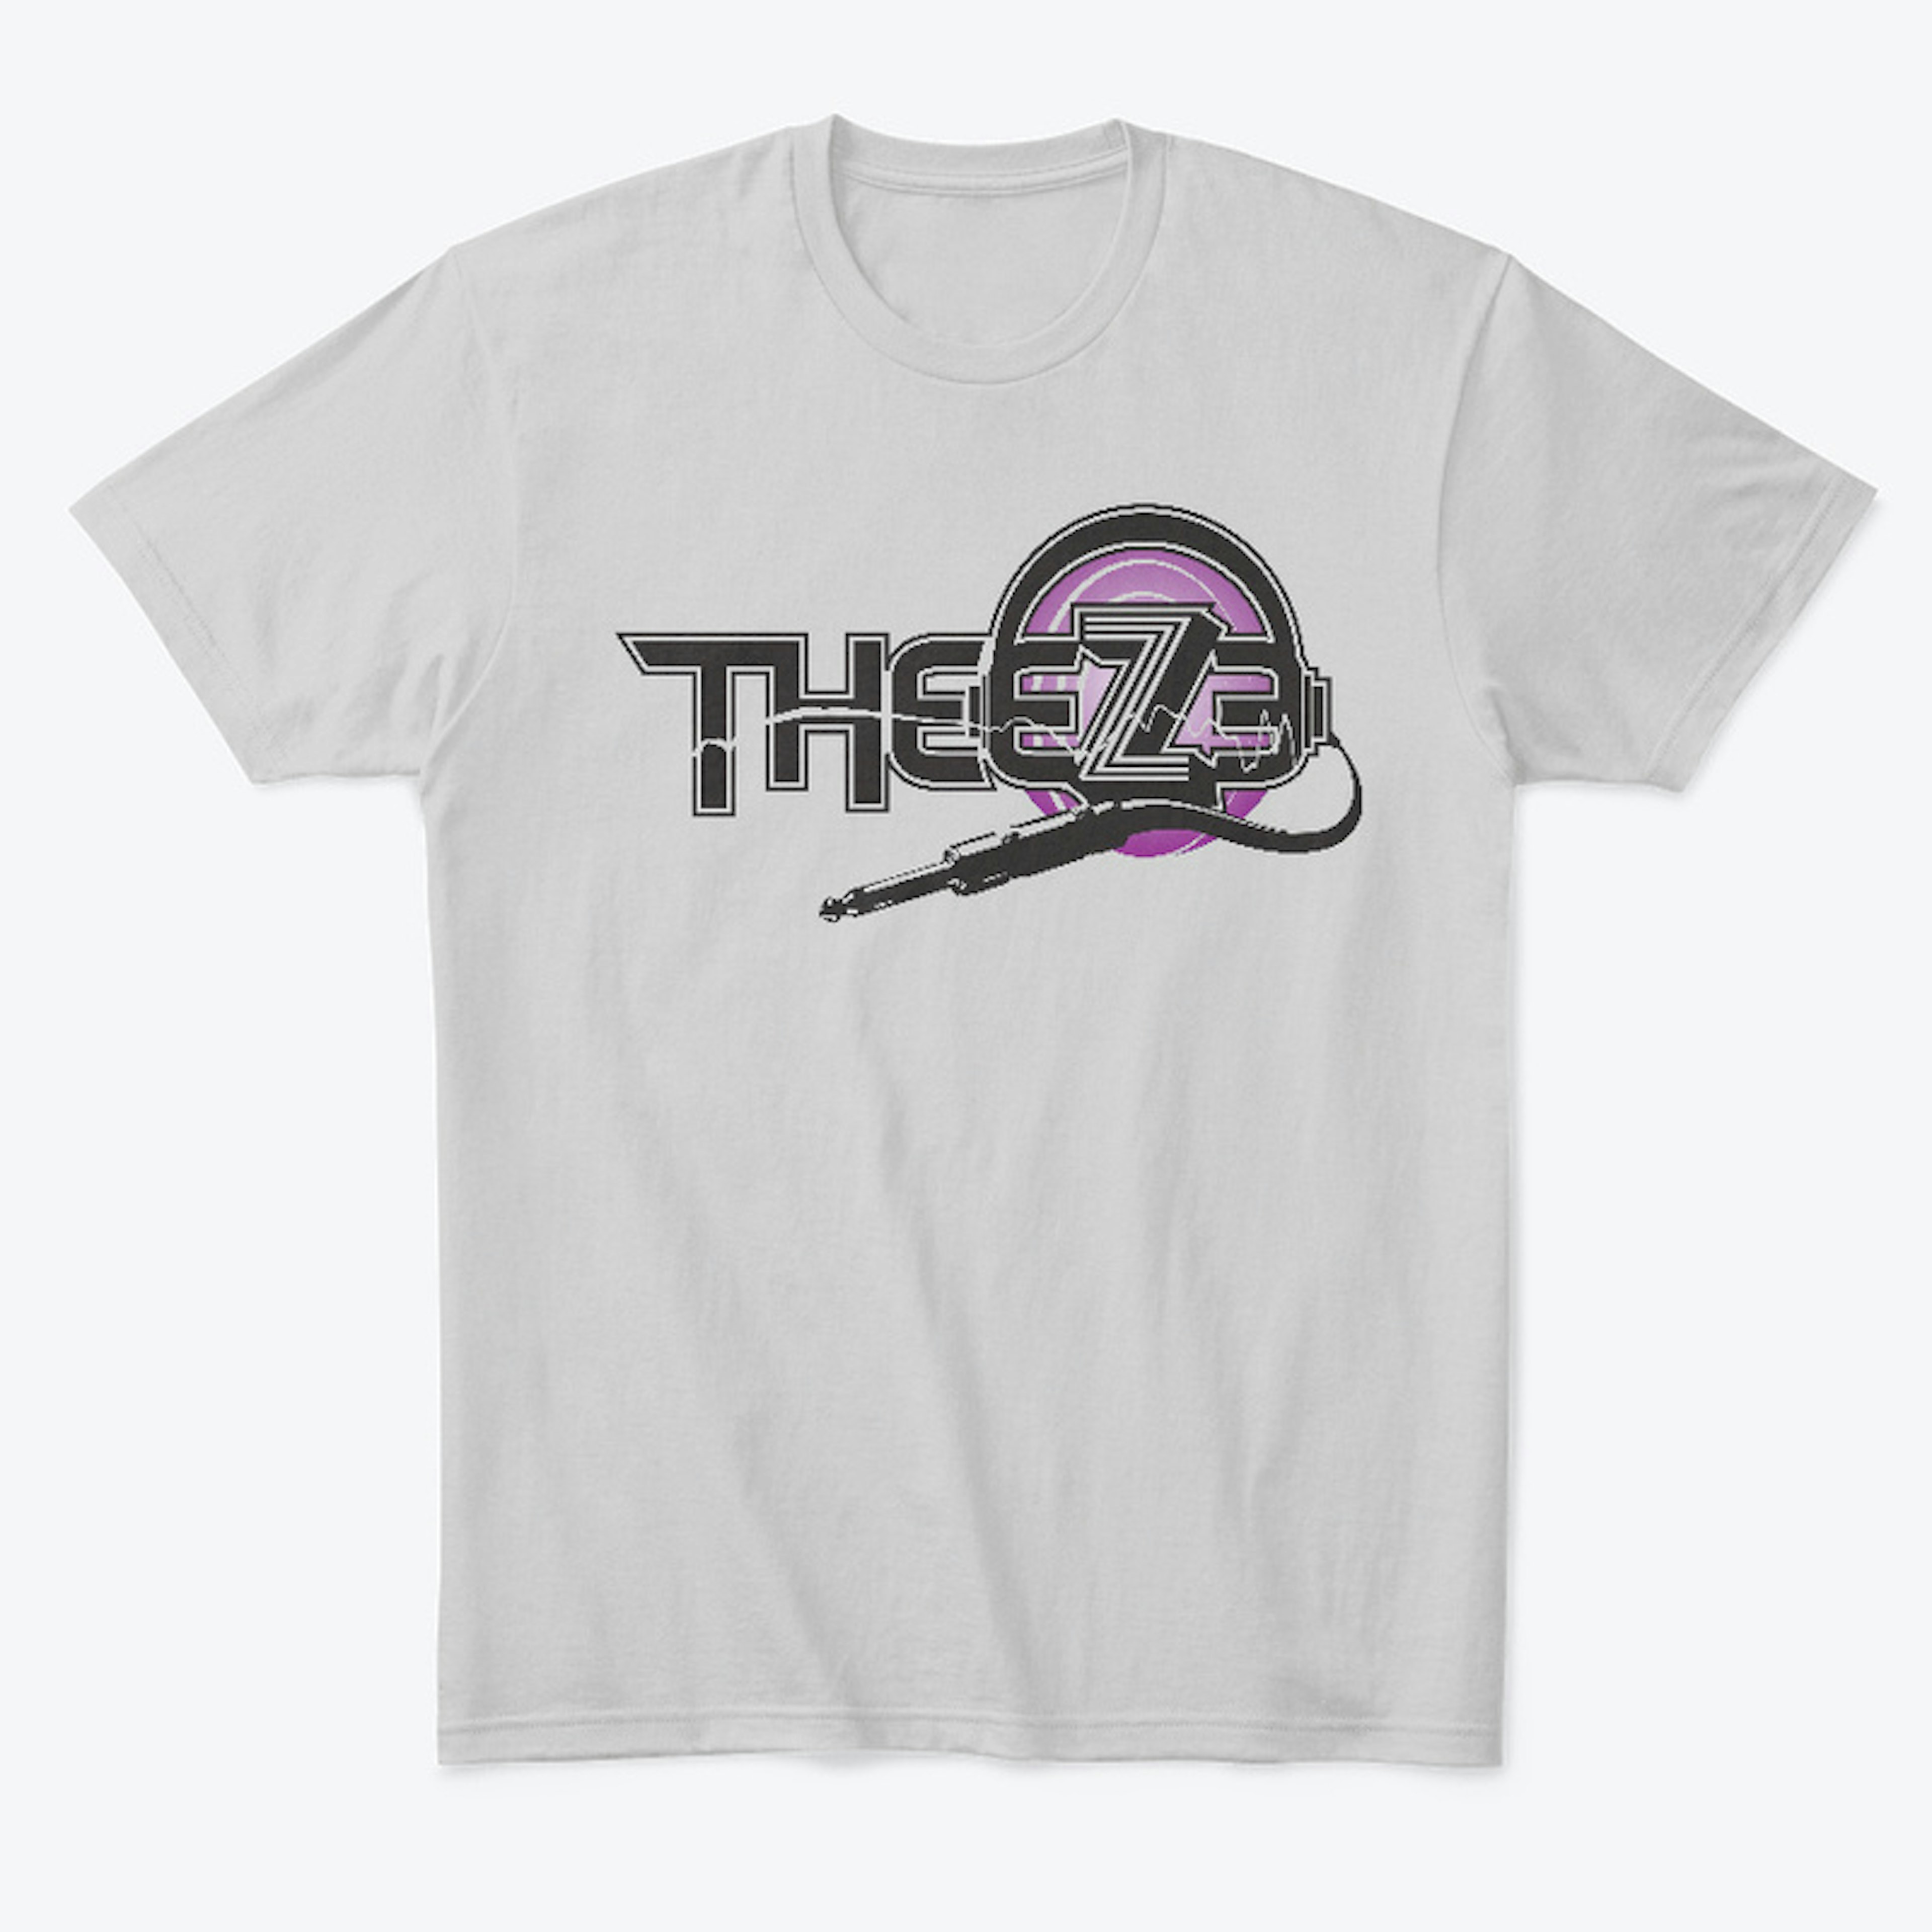 THEZE - The Best Word Ever